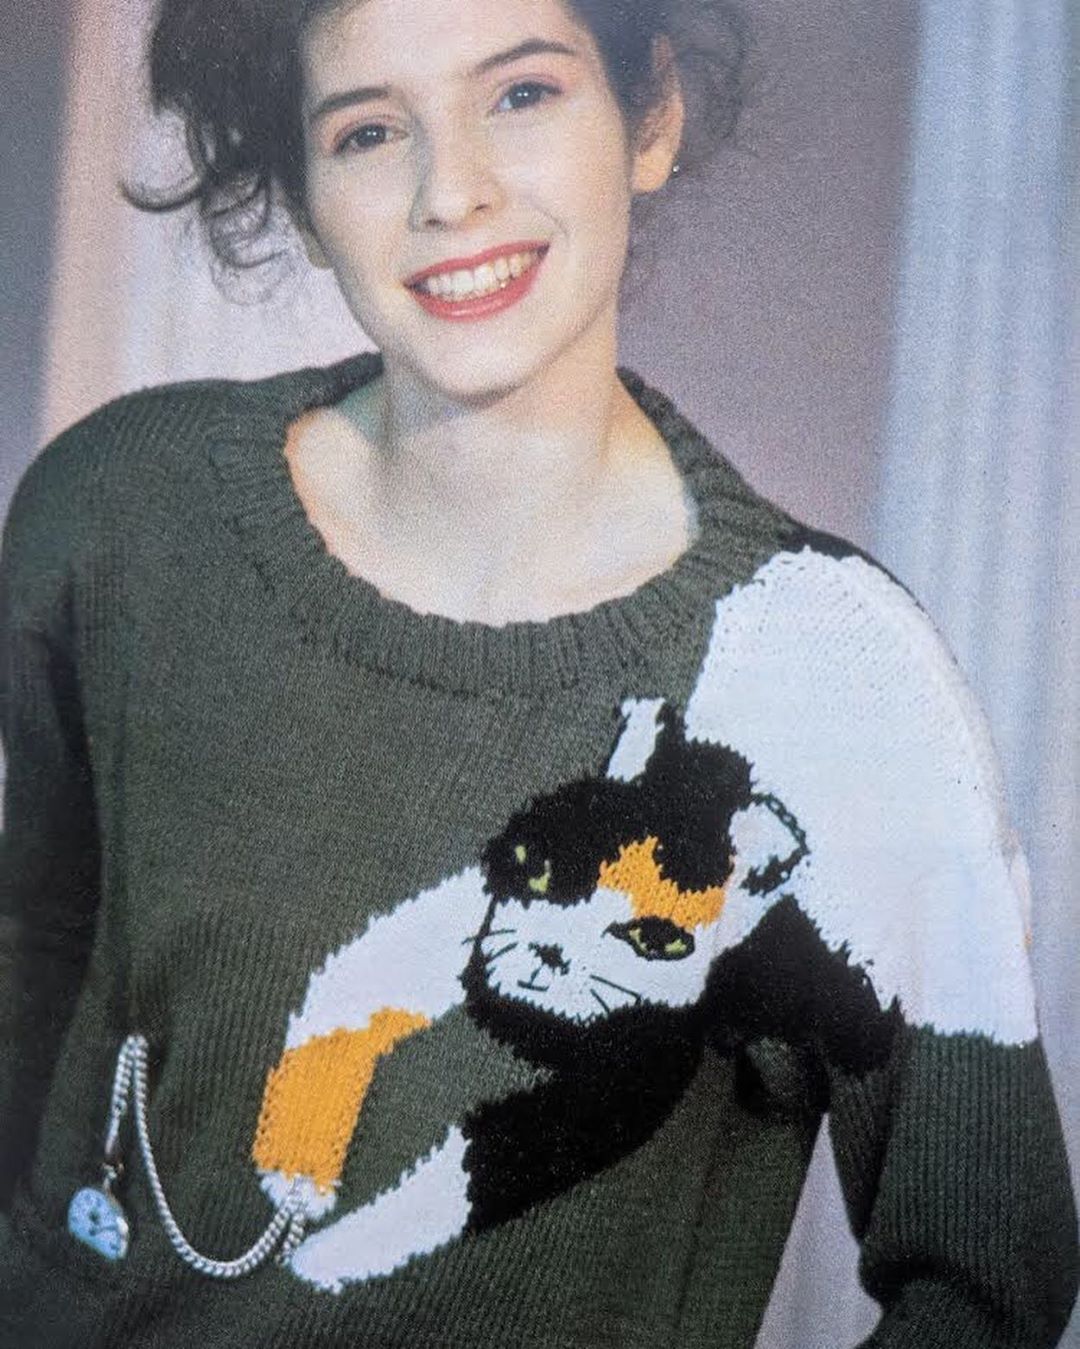 10 Lovely Cat-Themed Knitting Patterns From the 1980s ~ Vintage 